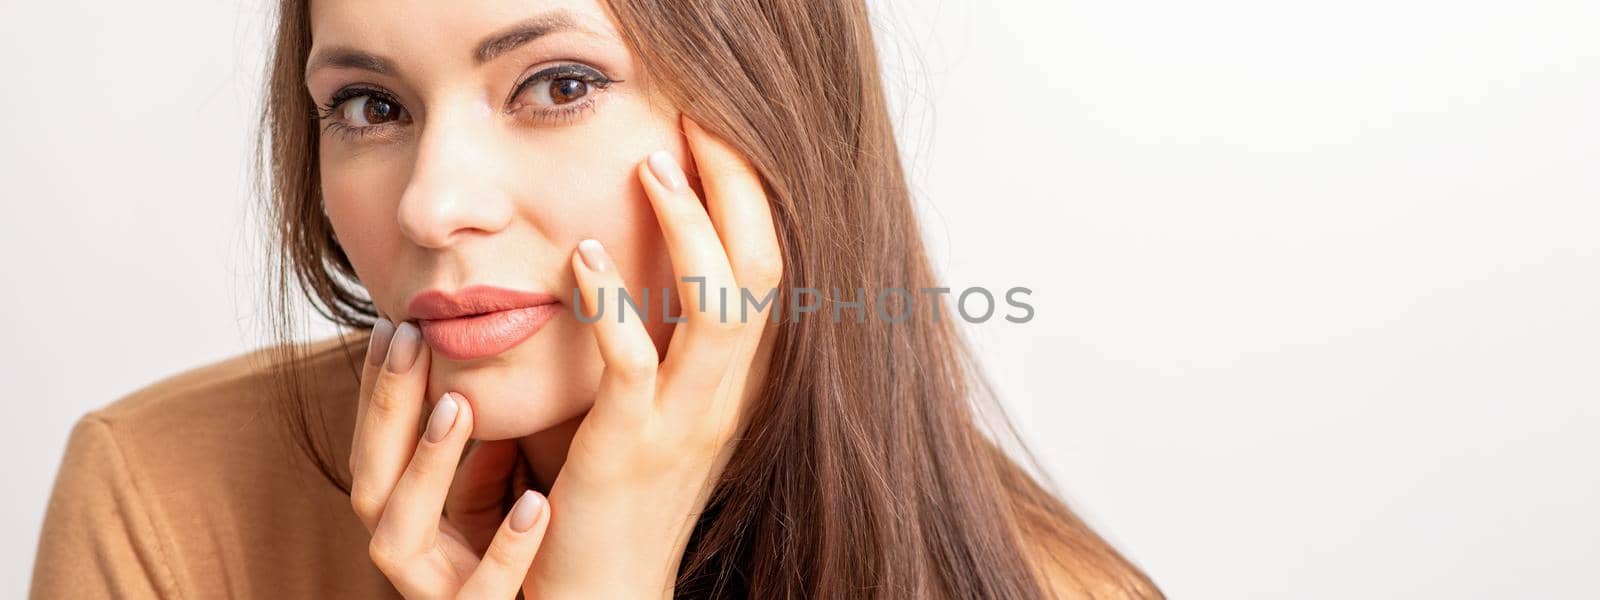 Portrait of the caucasian female model touching face with manicured fingers isolated on white background